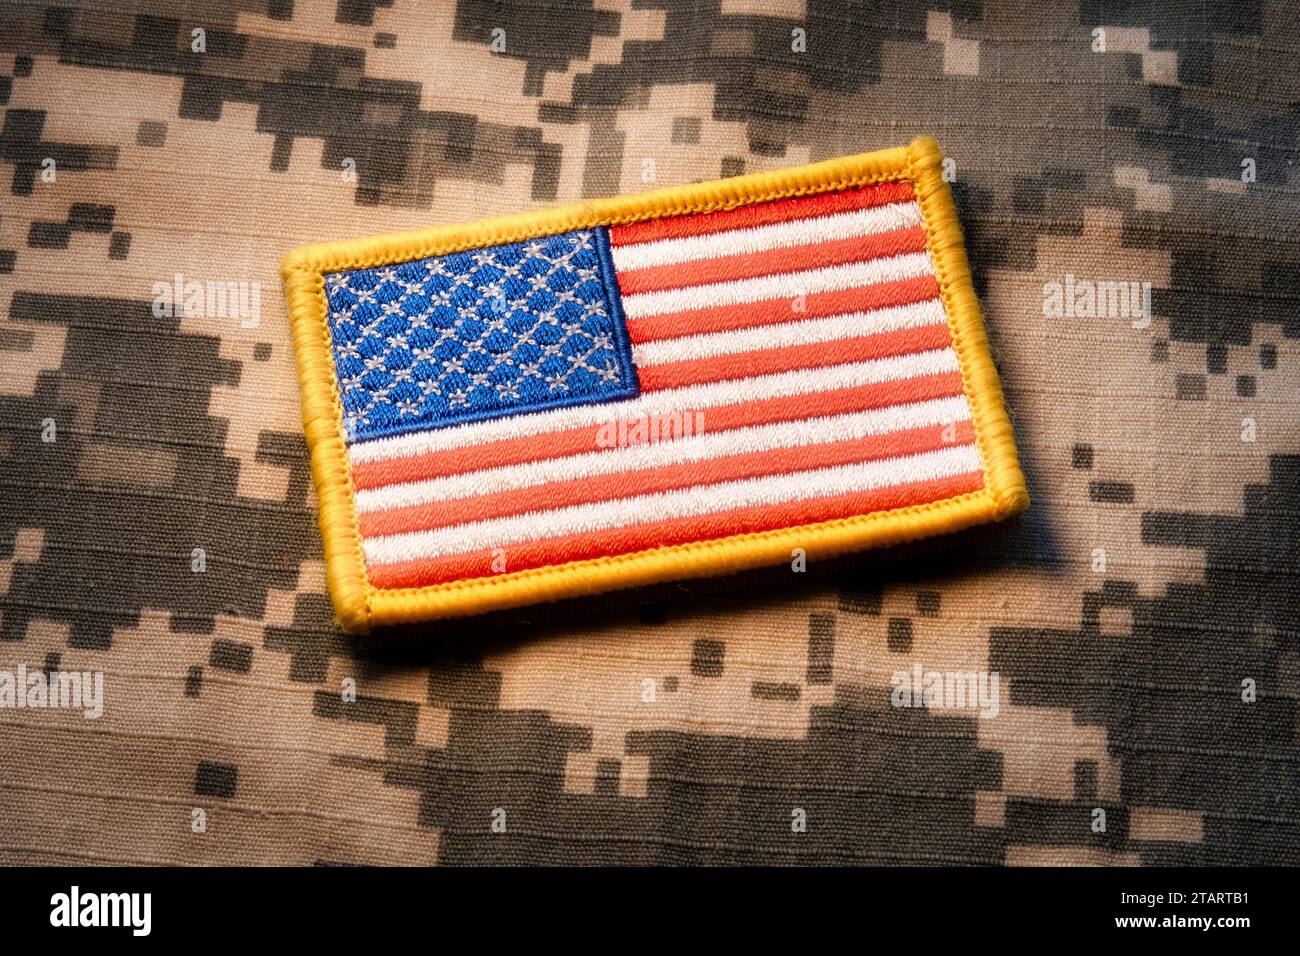 Close-up of an American flag patch on a background of military camouflage, 2023, United States Stock Photo